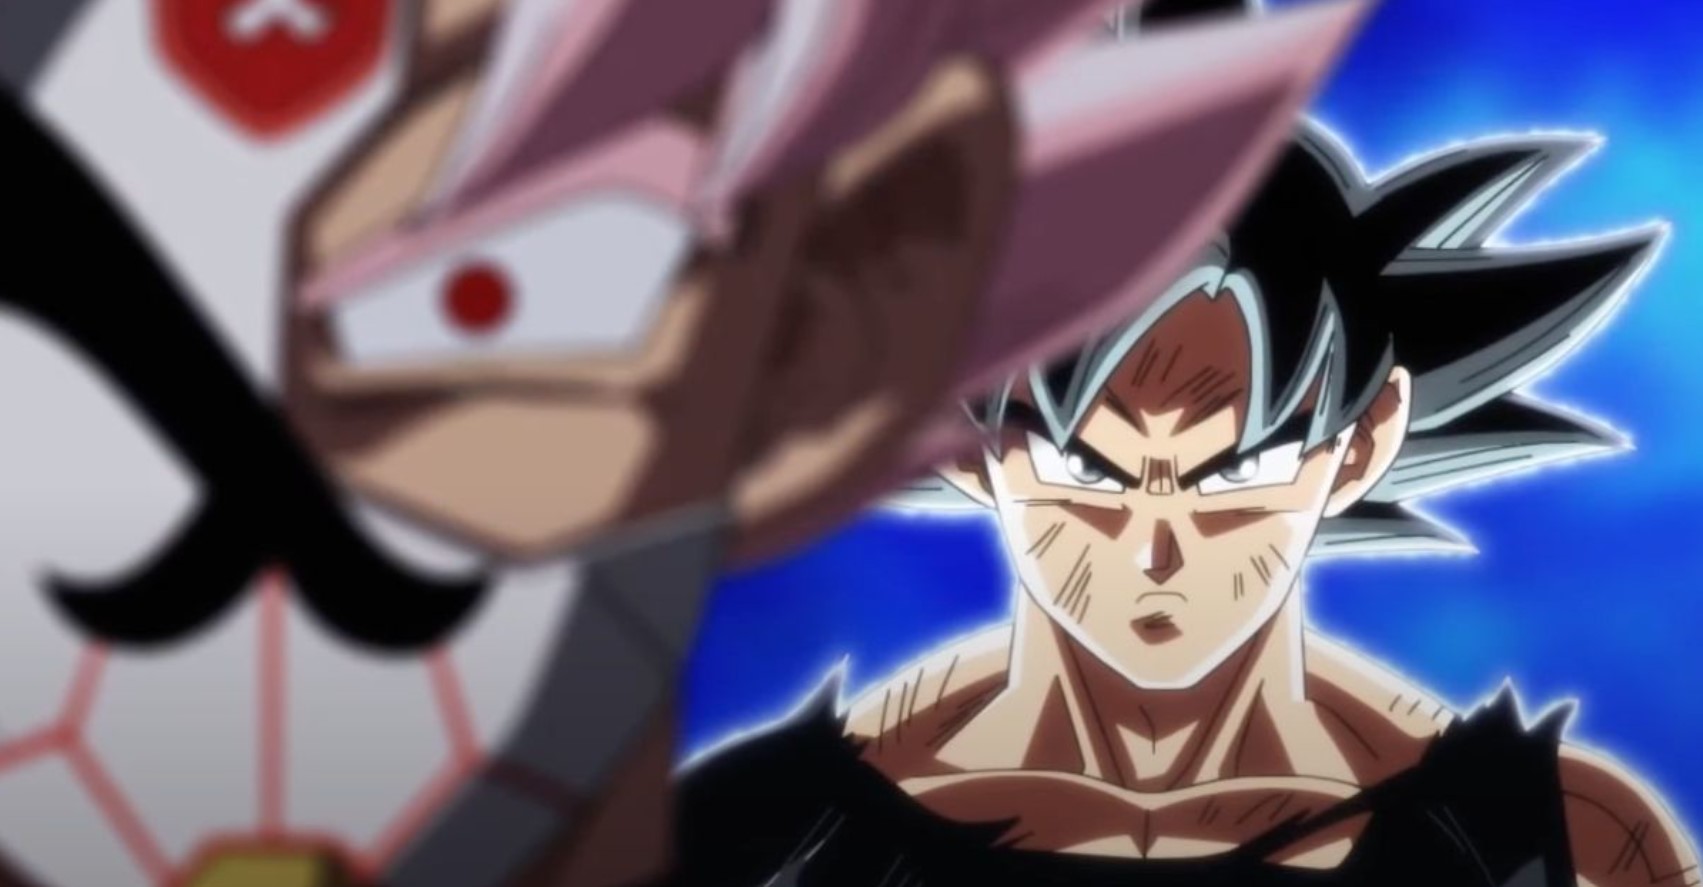 Super Dragon Ball Heroes Episode 46: Fighting The Dark King! Release Date